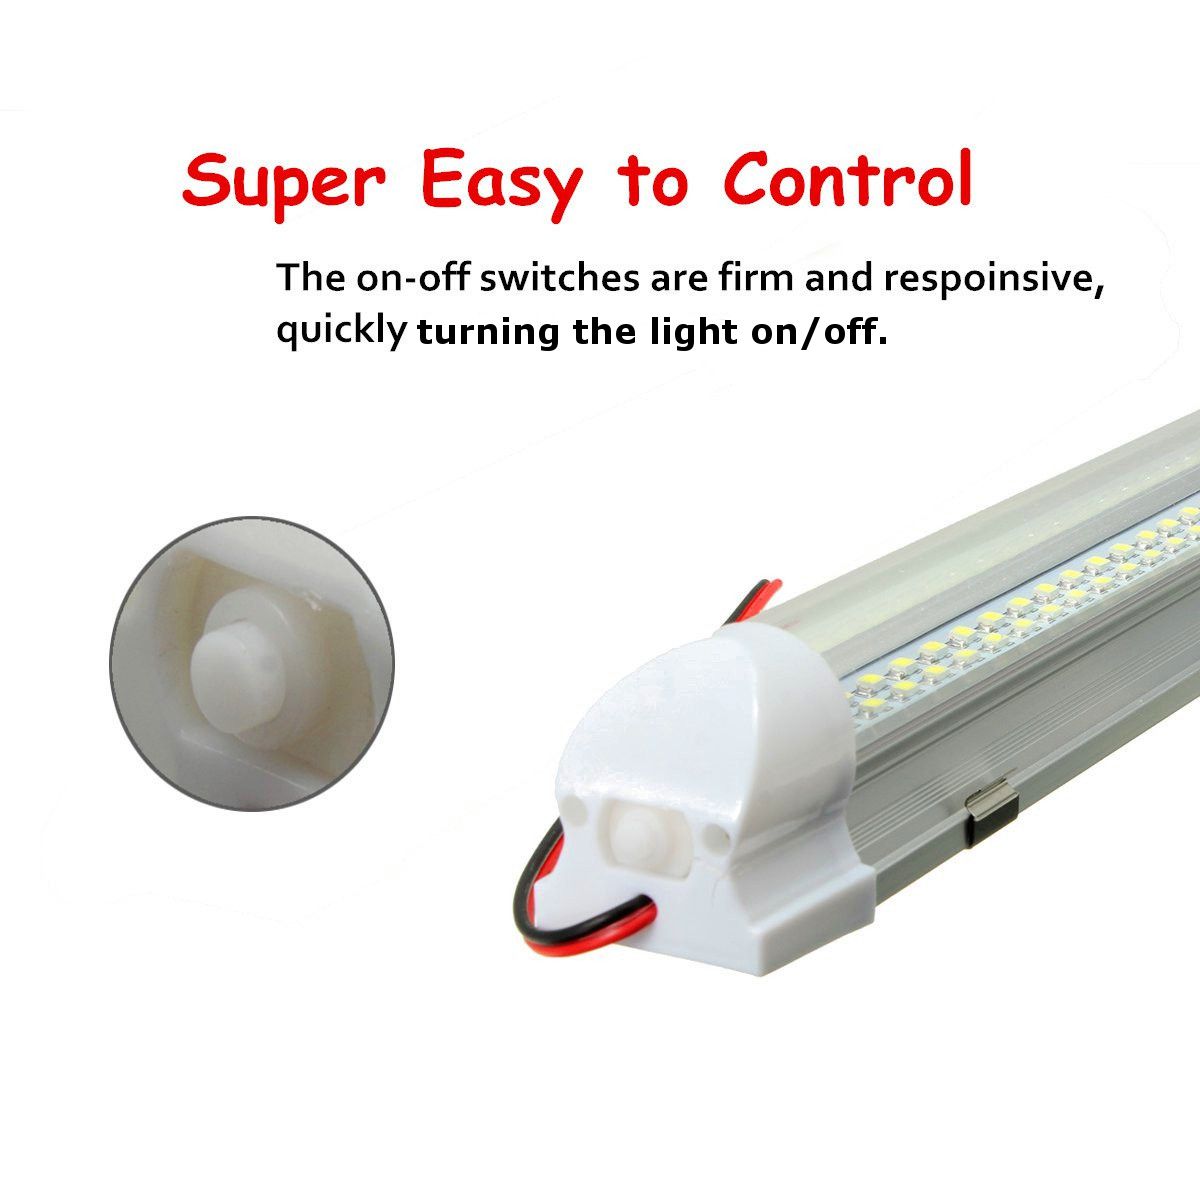 Universal-Interior-34cm-LED-Light-Strip-Lamp-White-with-ONOFF-Switch-1Pcs-for-Car-Auto-Caravan-Bus-1019239